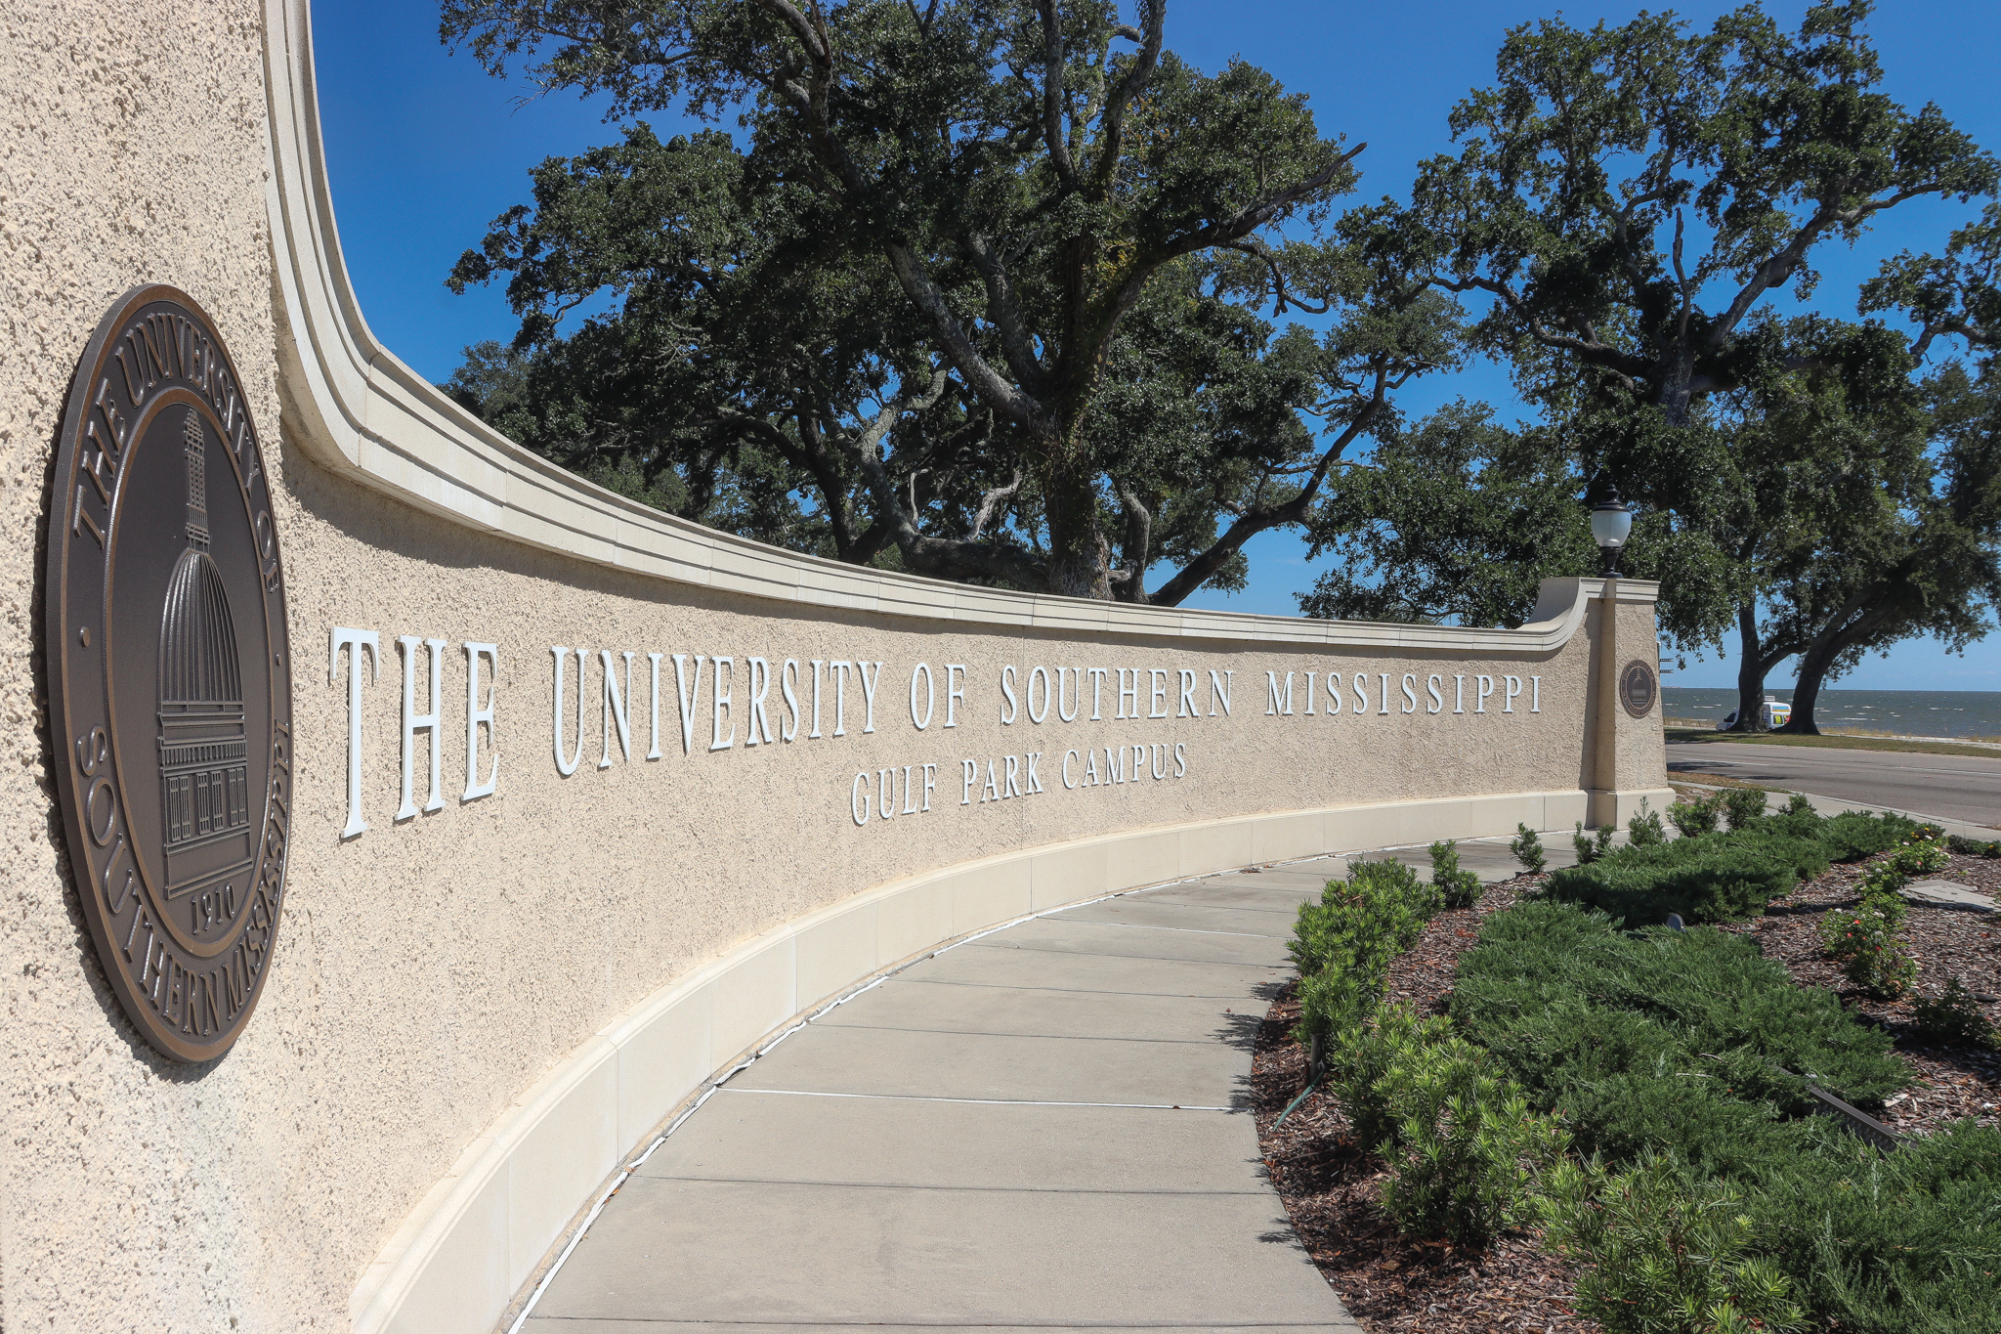 The entrance to the Gulf Park campus.